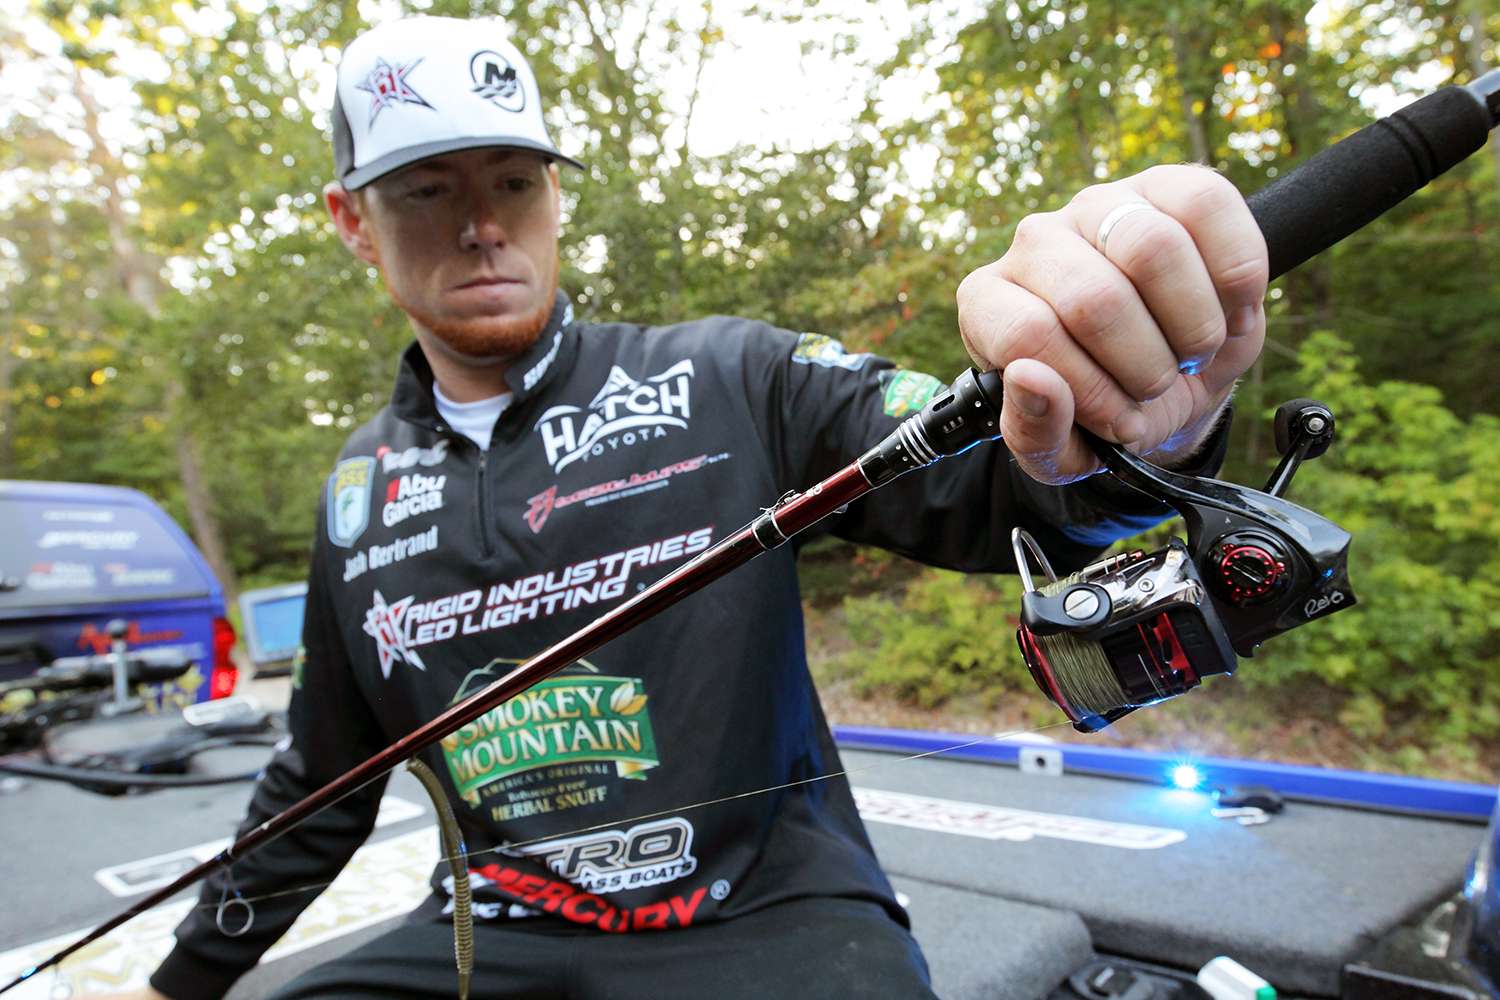 Here Bertrand showed off his favorite rod and reel combo. The rod is a 7-foot Abu Garcia Veracity paired with an Abu Garcia REVO spinning reel. In this example, Bertrand had a Senko with a nose sinker tied on.